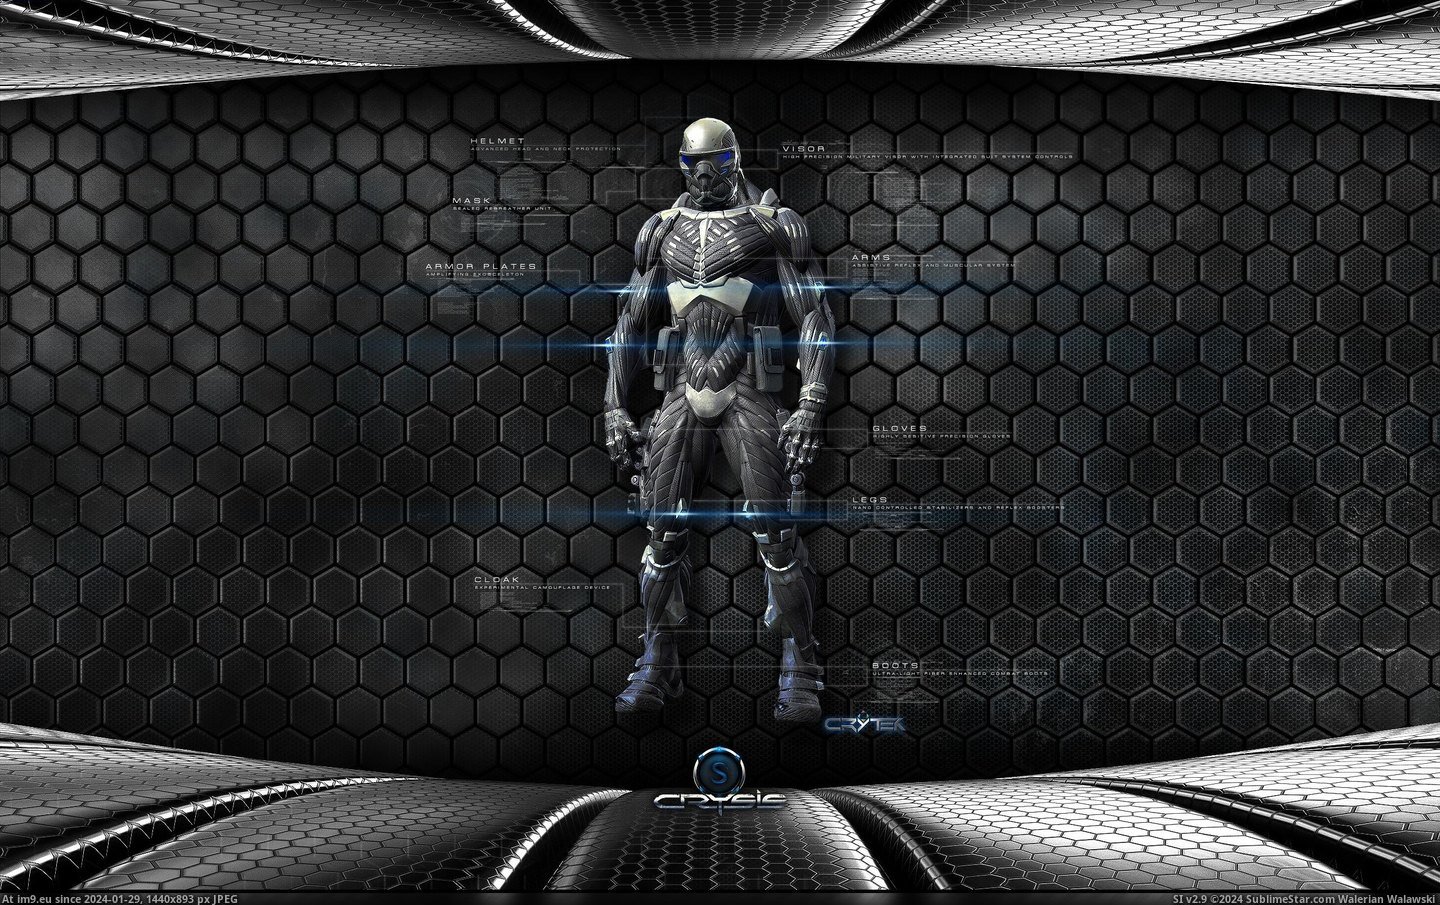 #Game #Crysis #Video Video Game Crysis 211440 Pic. (Obraz z album Games Wallpapers))